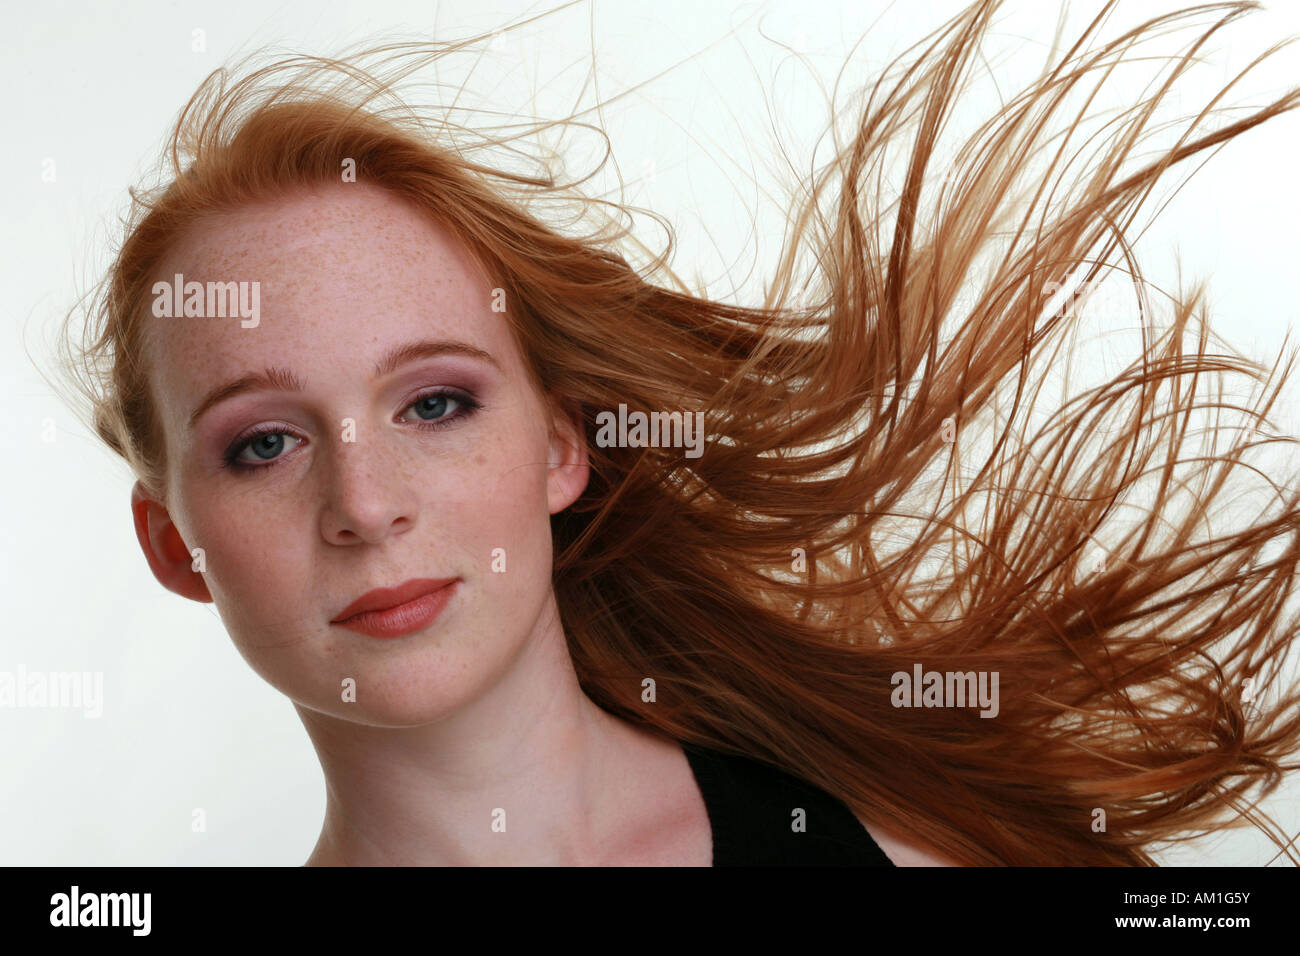 Portrait of a girl with moving red hair and freckles Stock Photo